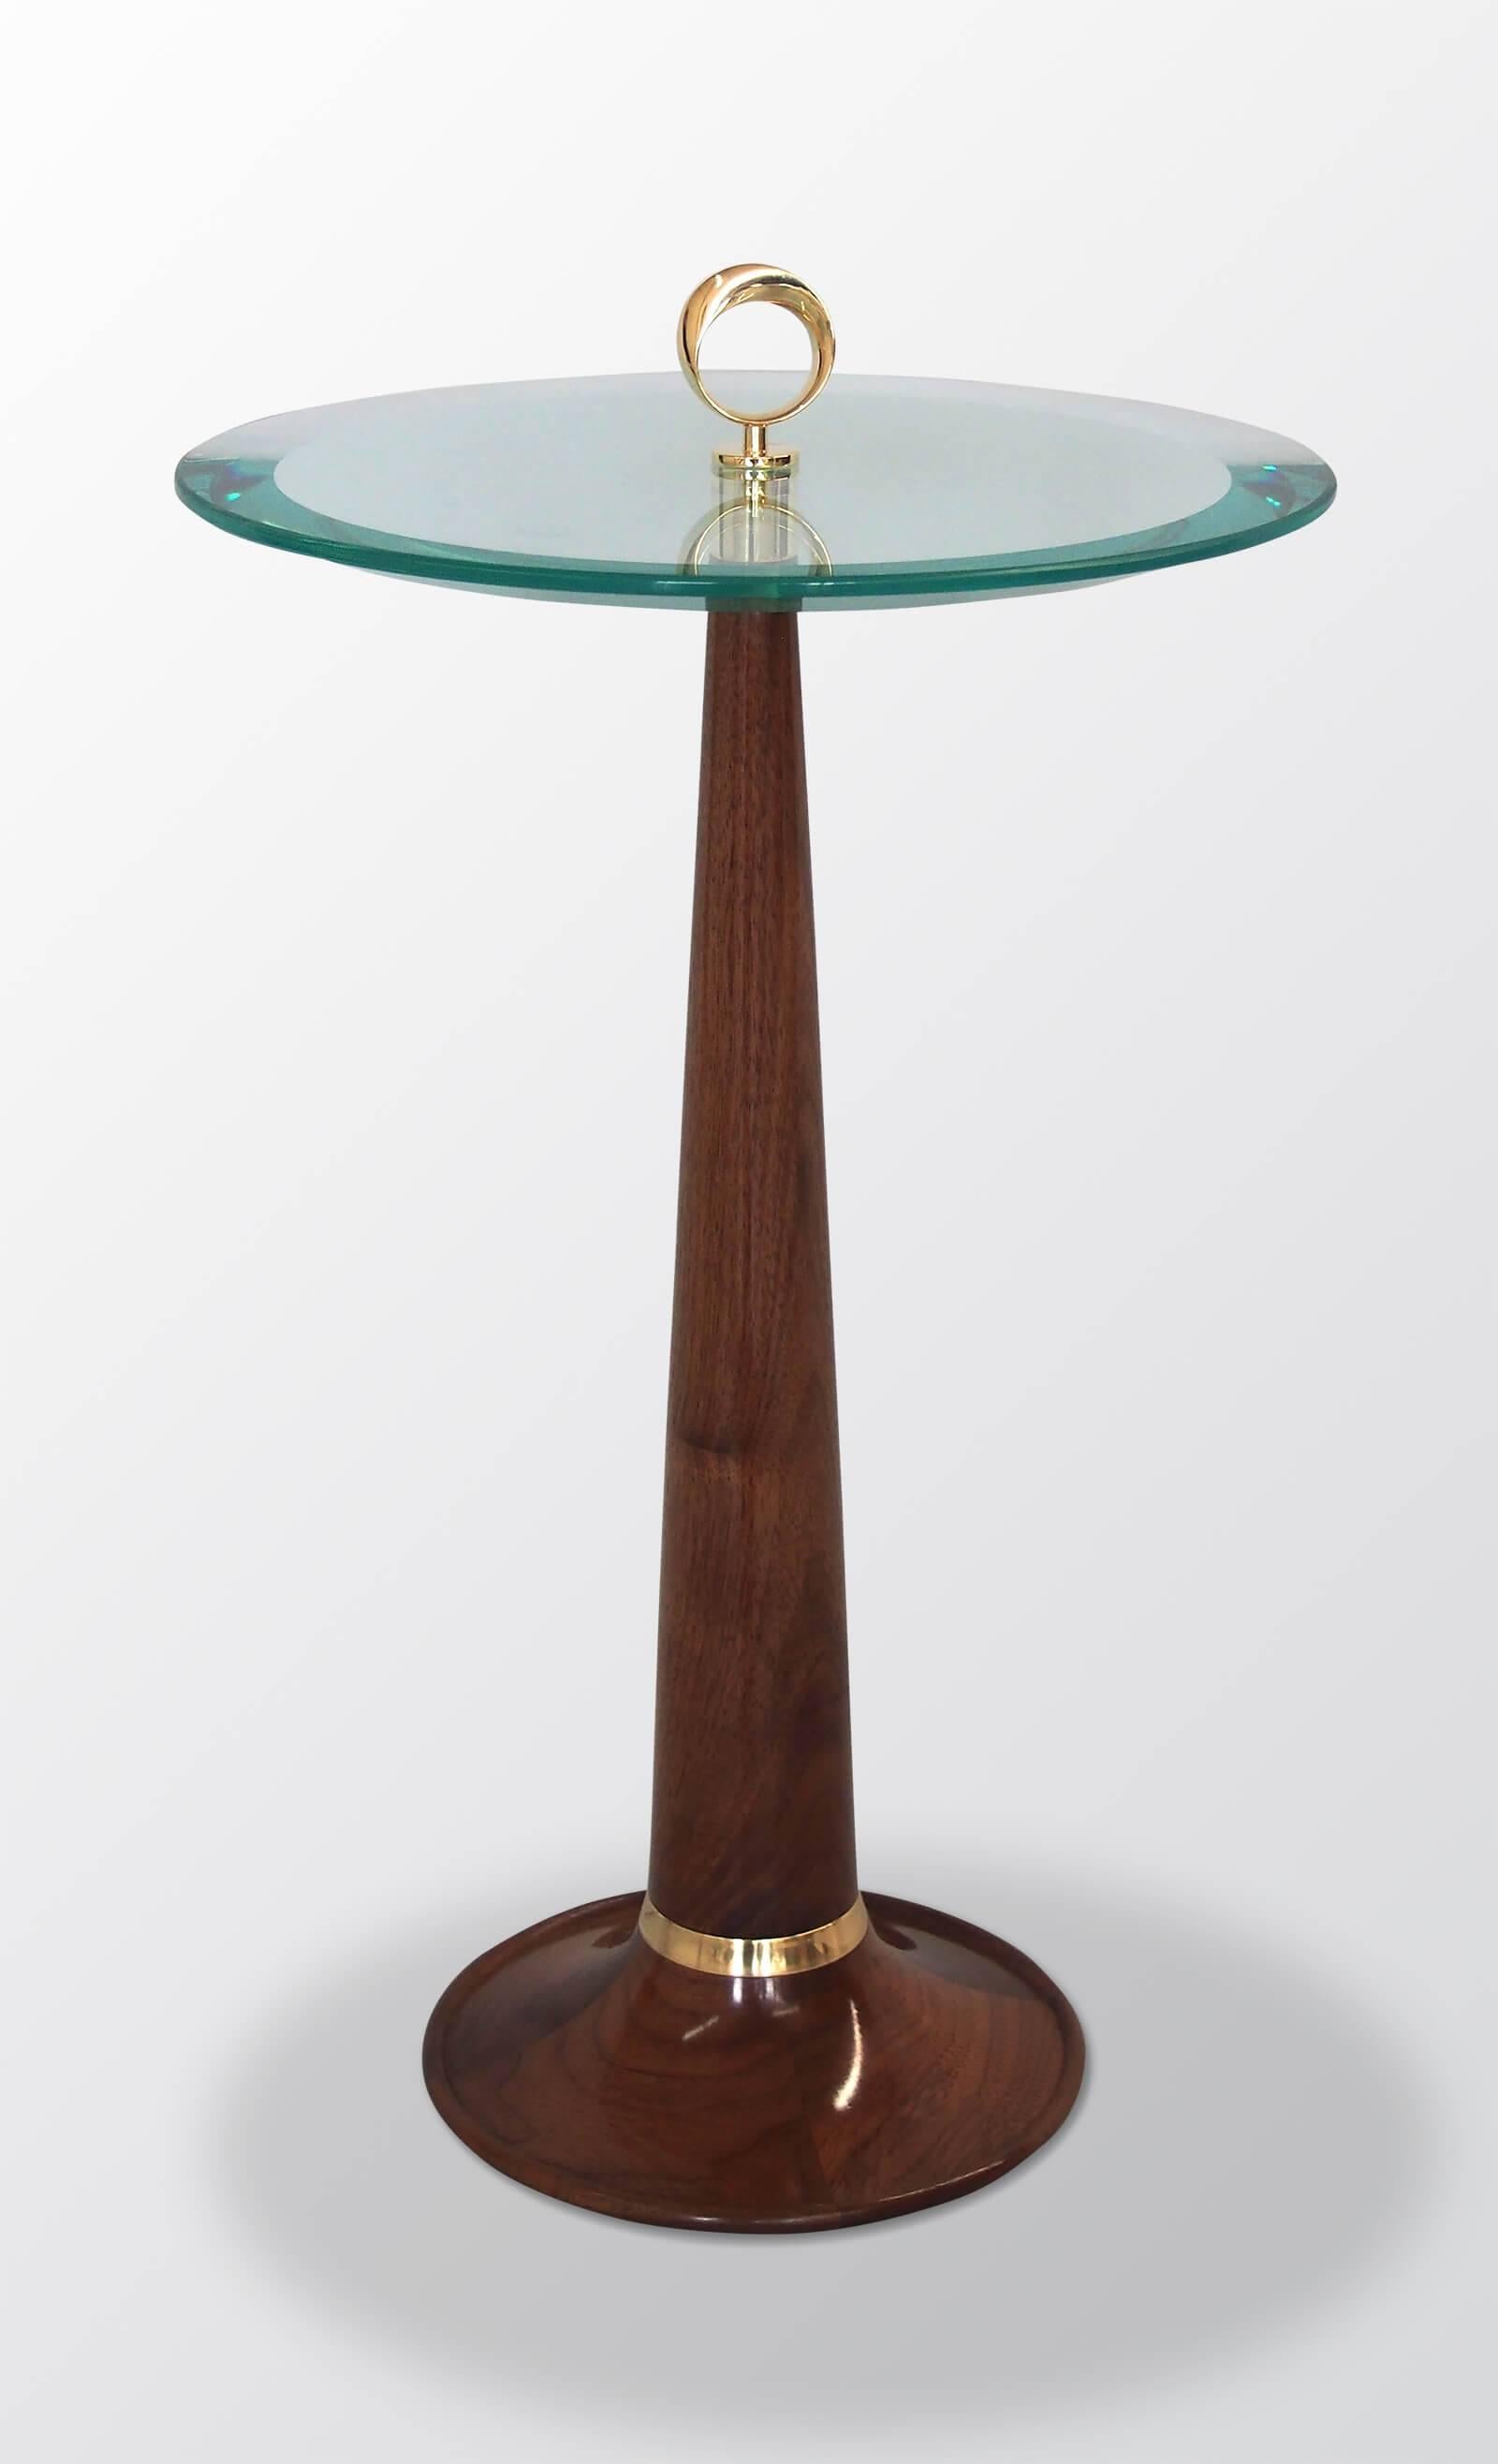 A very petite occasional table in solid carved walnut with an acute bevelled glass top, original Moebius-strip design brass hardware. French polish finish.